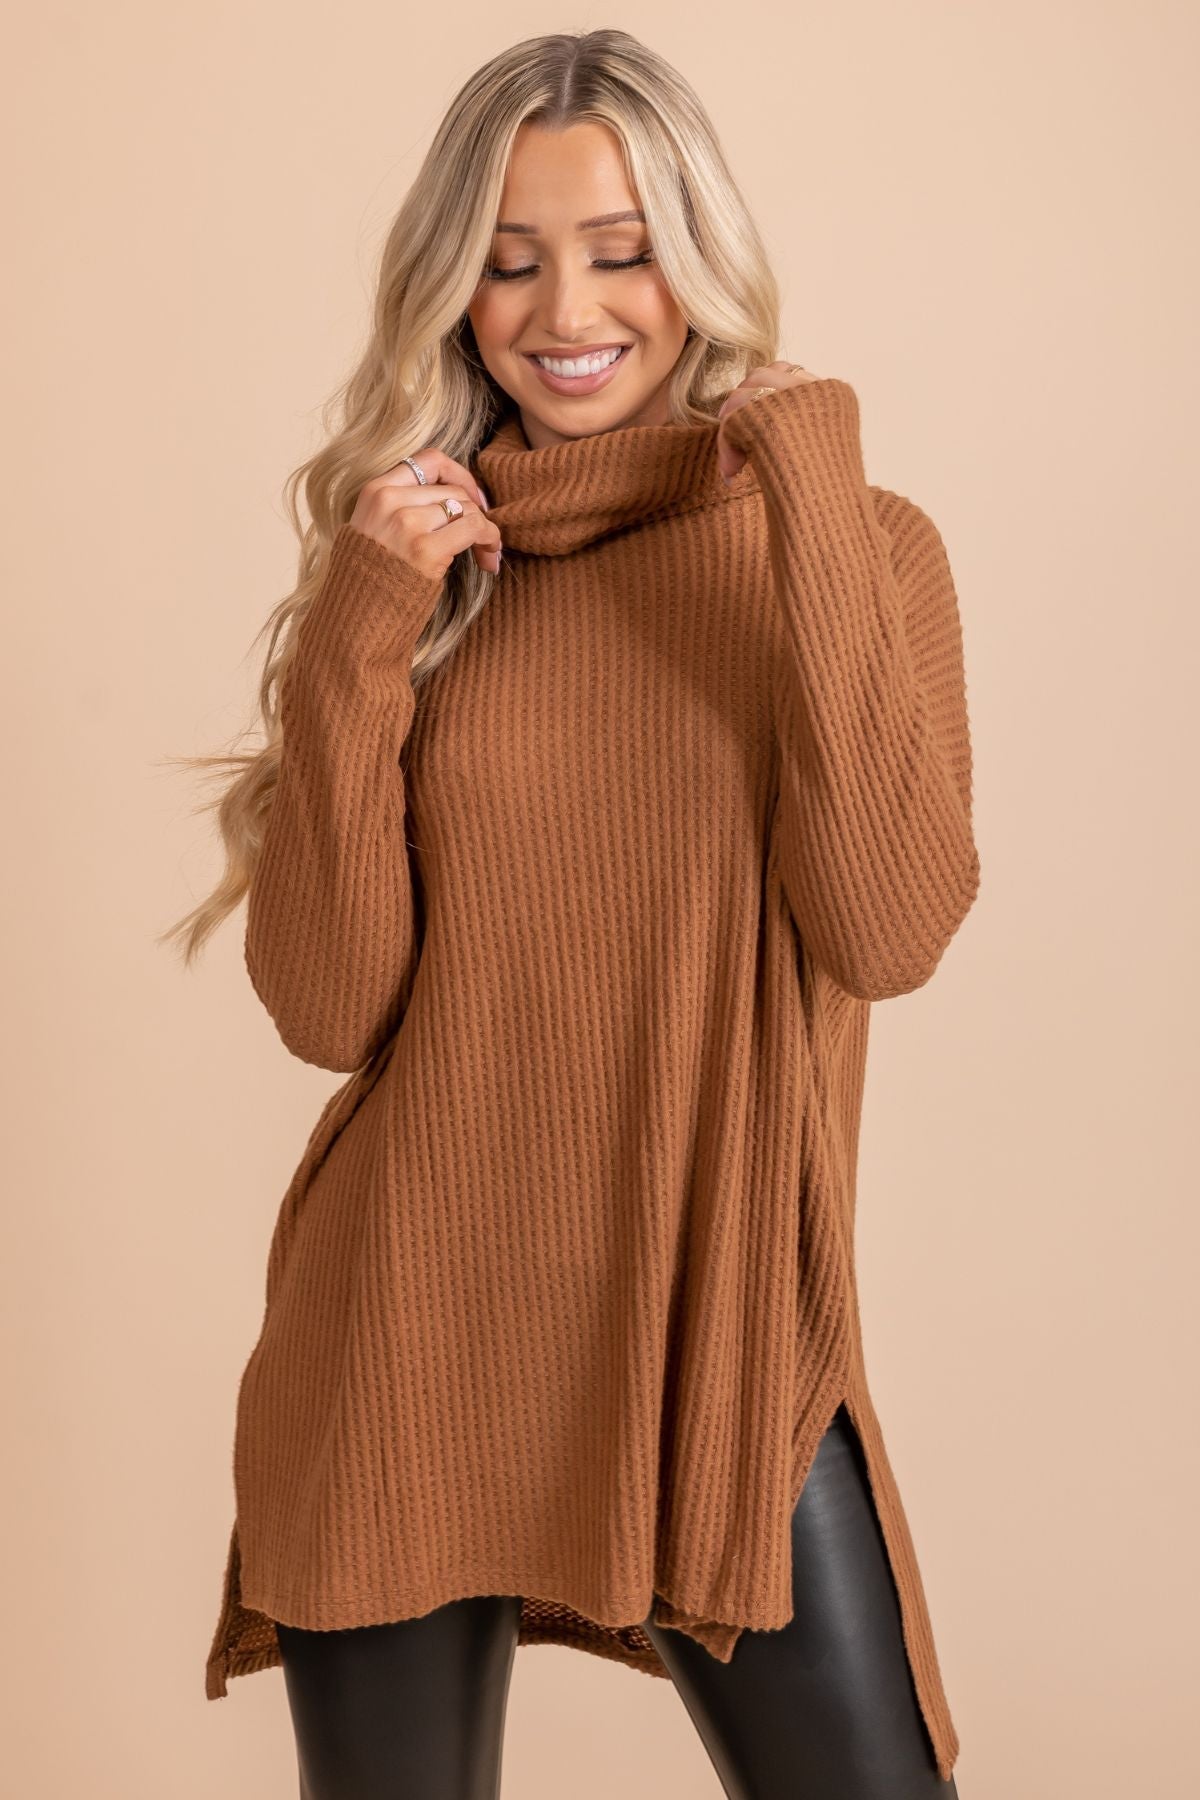 Brown Waffle Knit Boutique Tops for Women